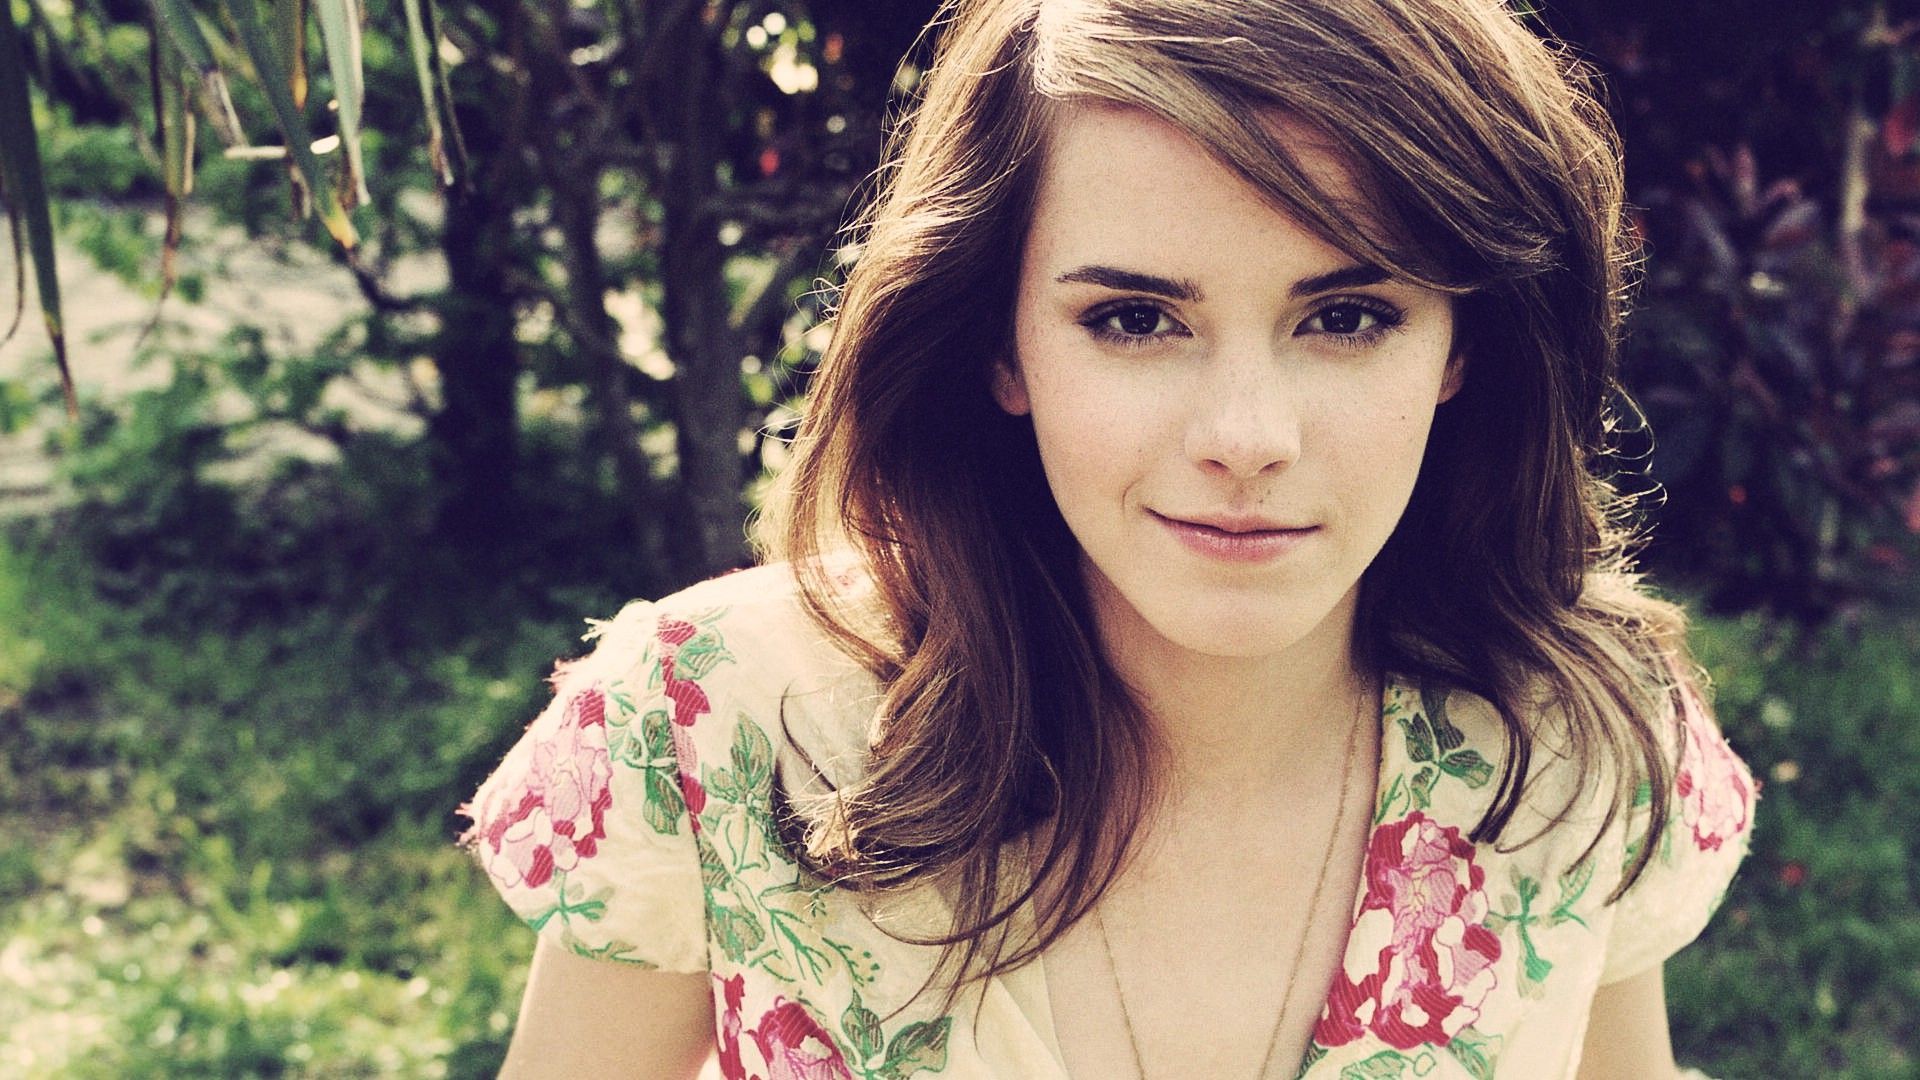 Emma Watson Cast as Belle in Disney's Live-Action Beauty and the Beast